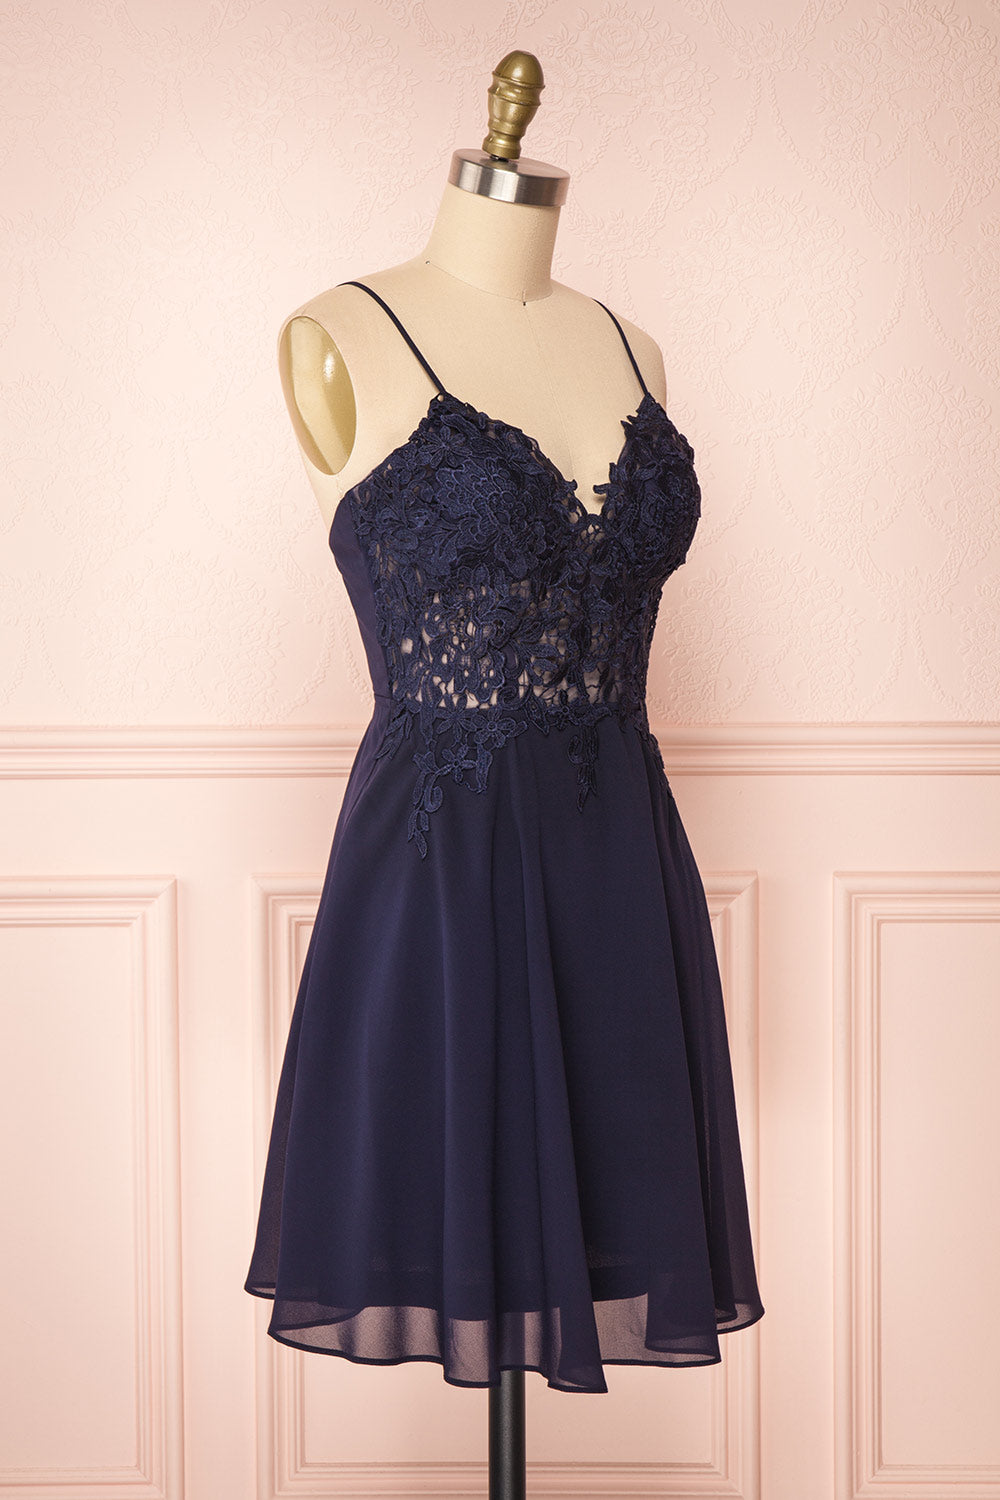 Irena Lapis Navy Blue Short Dress w/ Embroidered Mesh | Boutique 1861 side view 